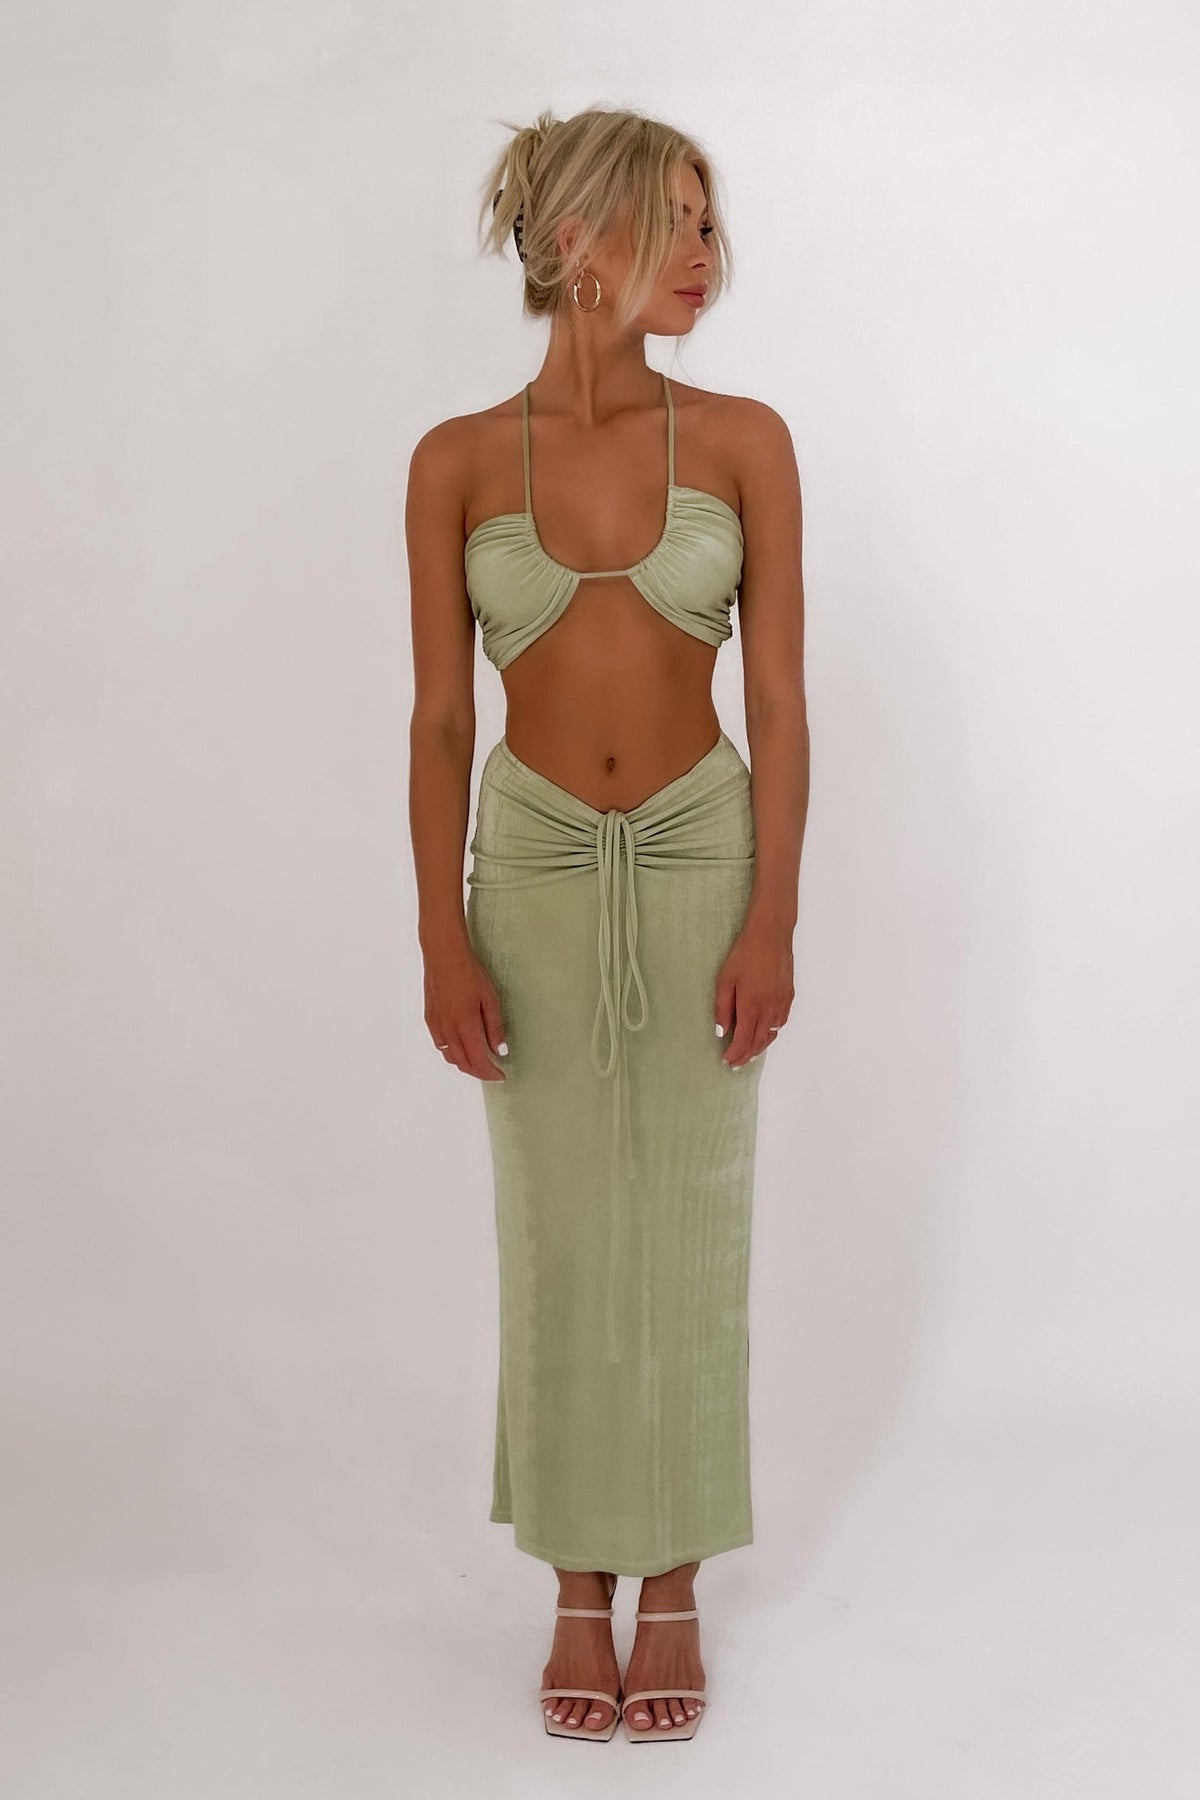 Ayrah Top, CROP TOPS, GREEN, POLYESTER &amp; SPANDEX, POLYESTER AND SPANDEX, Sale, SPANDEX &amp; POLYESTER, SPANDEX AND POLYESTER, TOP, TOPS, Our New Ayrah Top Is Now Only $41.00 Exclusive At Mishkah, Our New Ayrah Top is now only $41.00-We Have The Latest Women&#39;s Tops @ Mishkah Online Fashion Boutique-MISHKAH